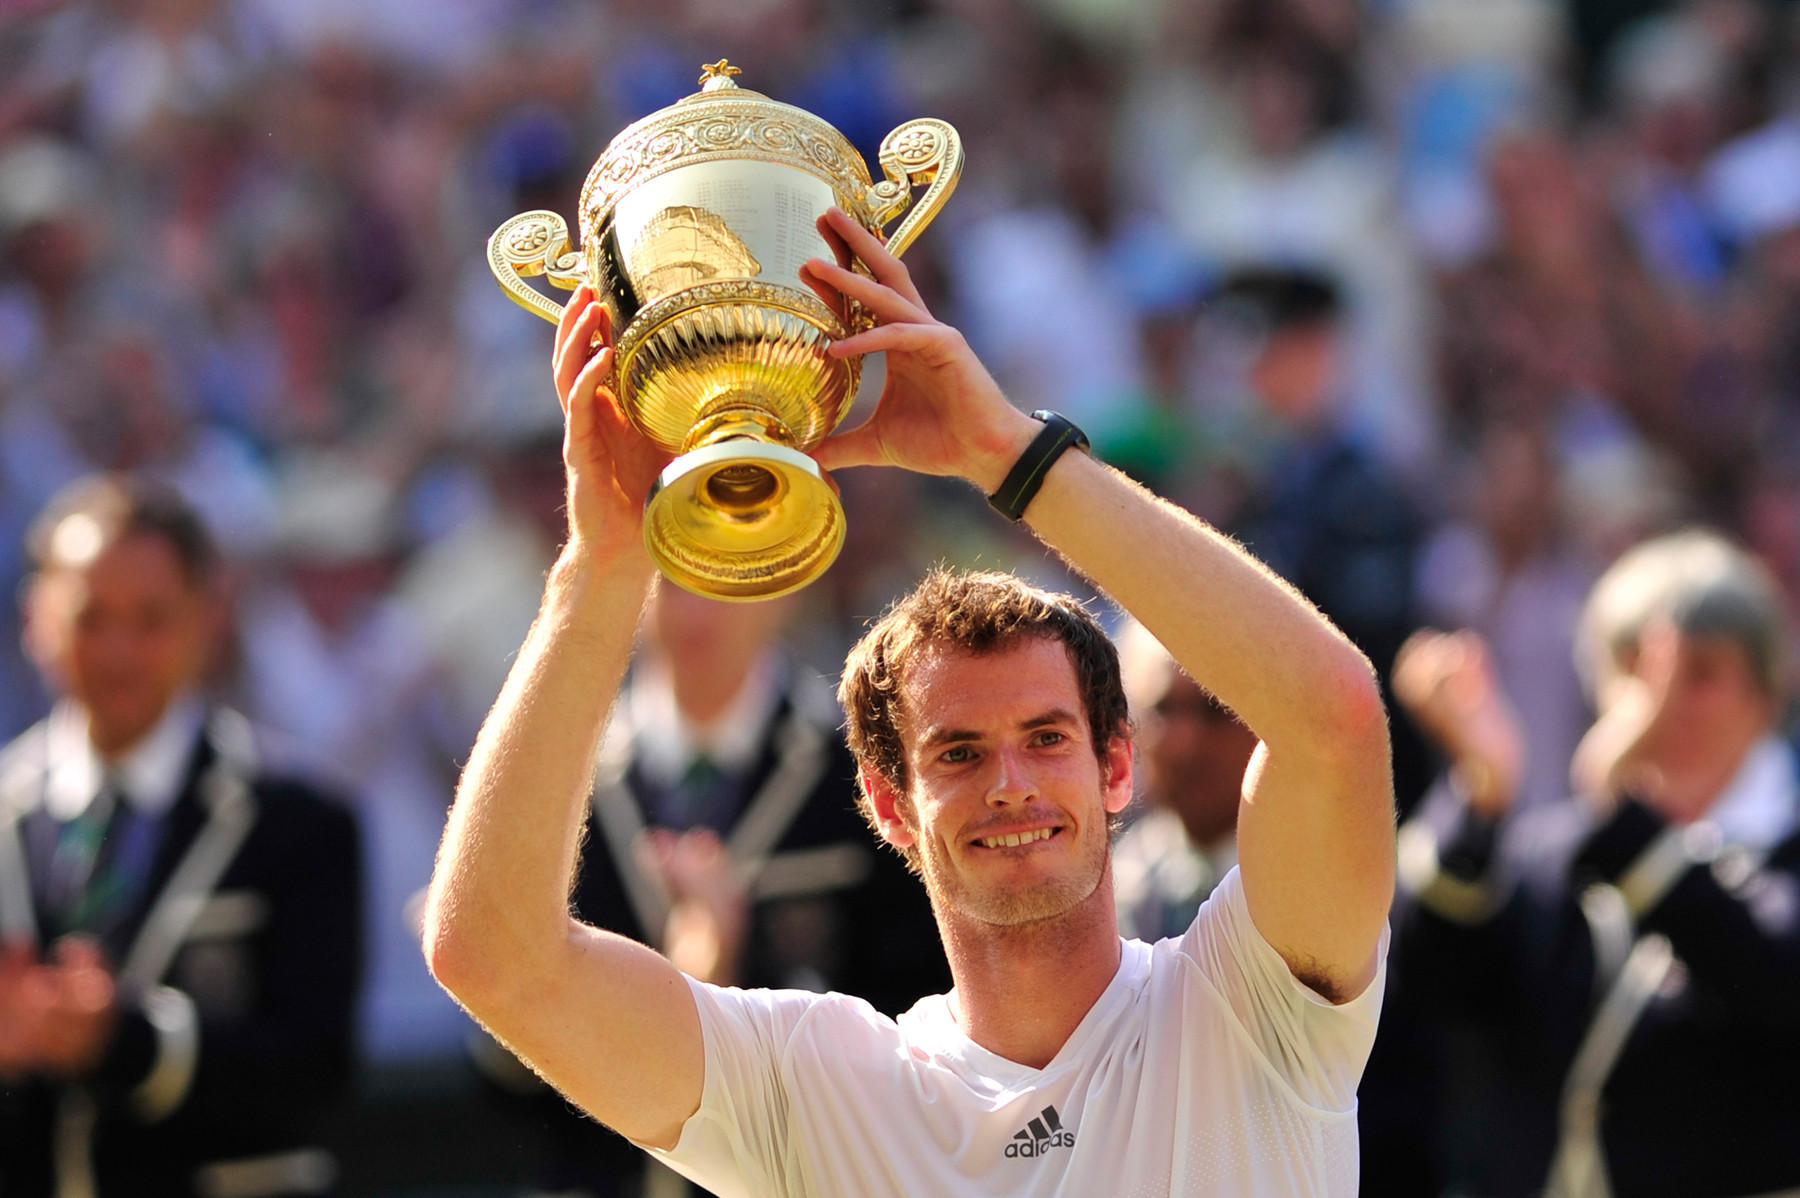 Andy Murray ended Britain's 77-year wait for a winner of the men's singles title at Wimbledon when he lifted the trophy in 2013 - a year after winning the Olympic gold medal on the same court ©Getty Image